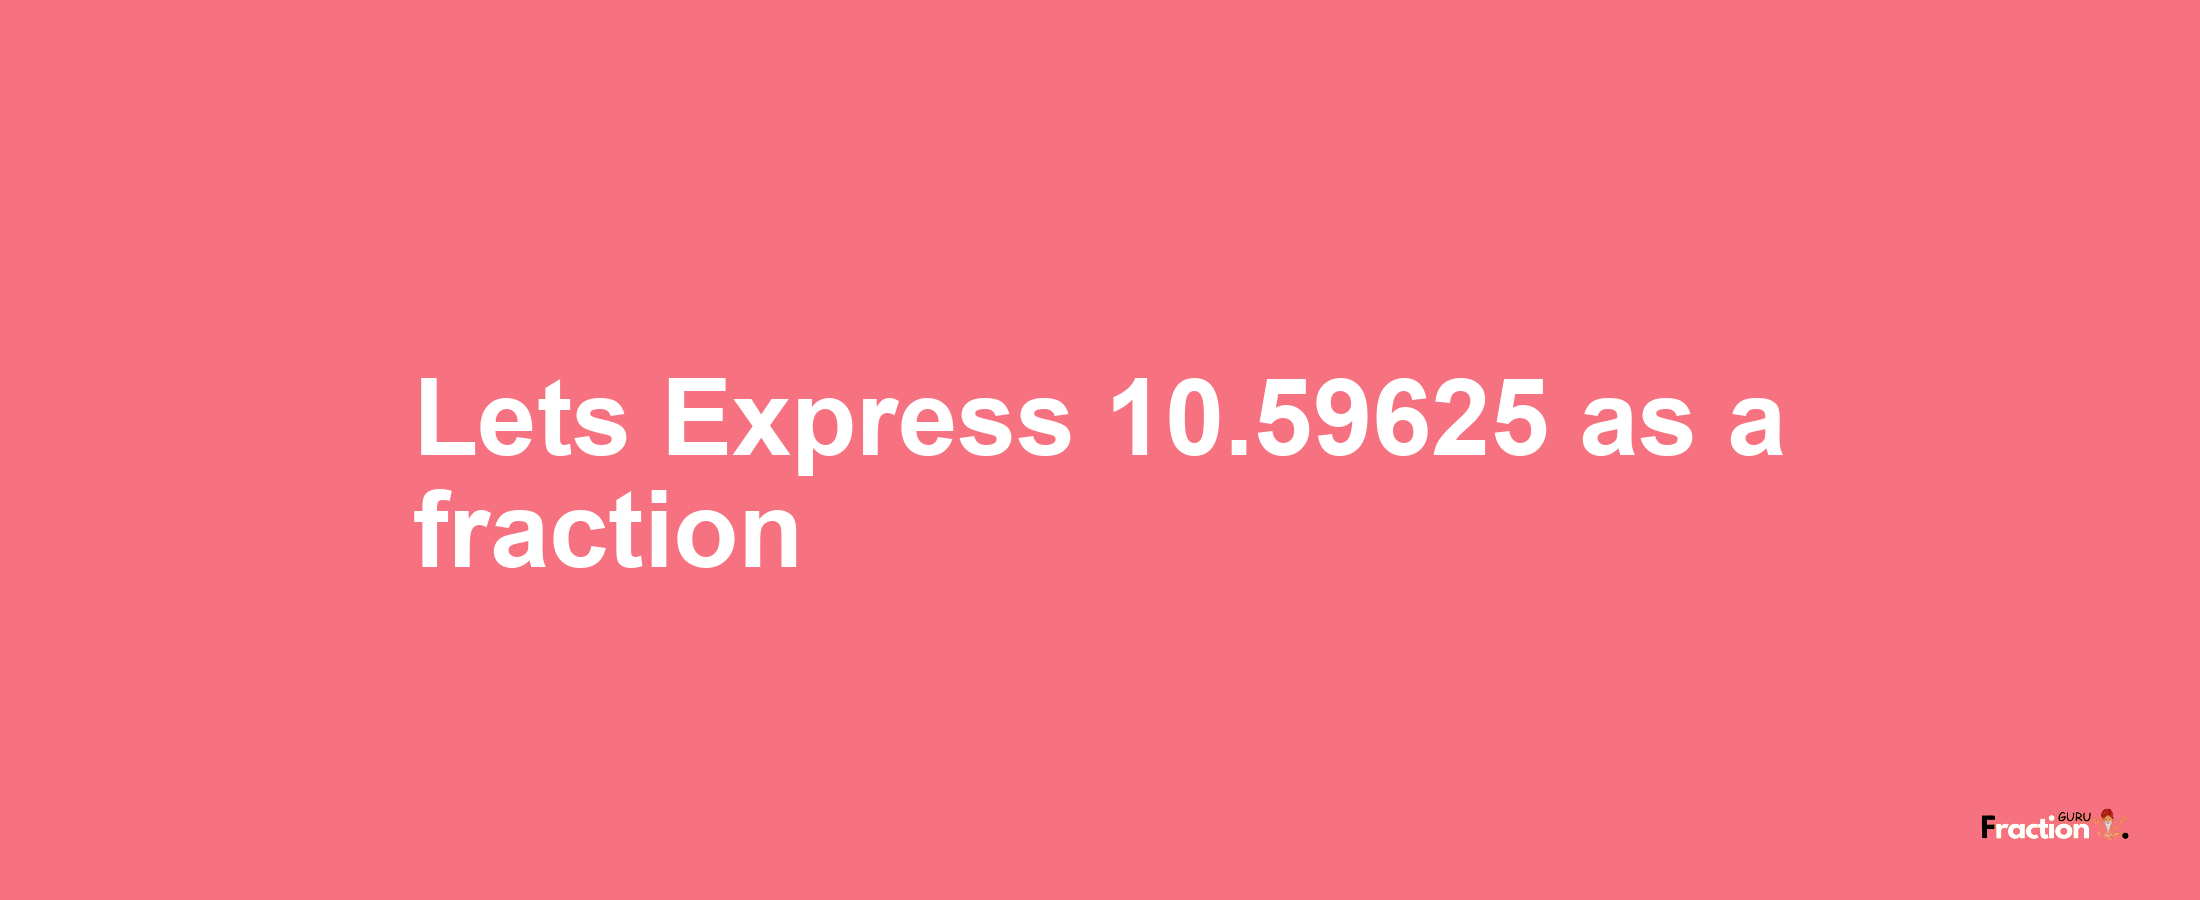 Lets Express 10.59625 as afraction